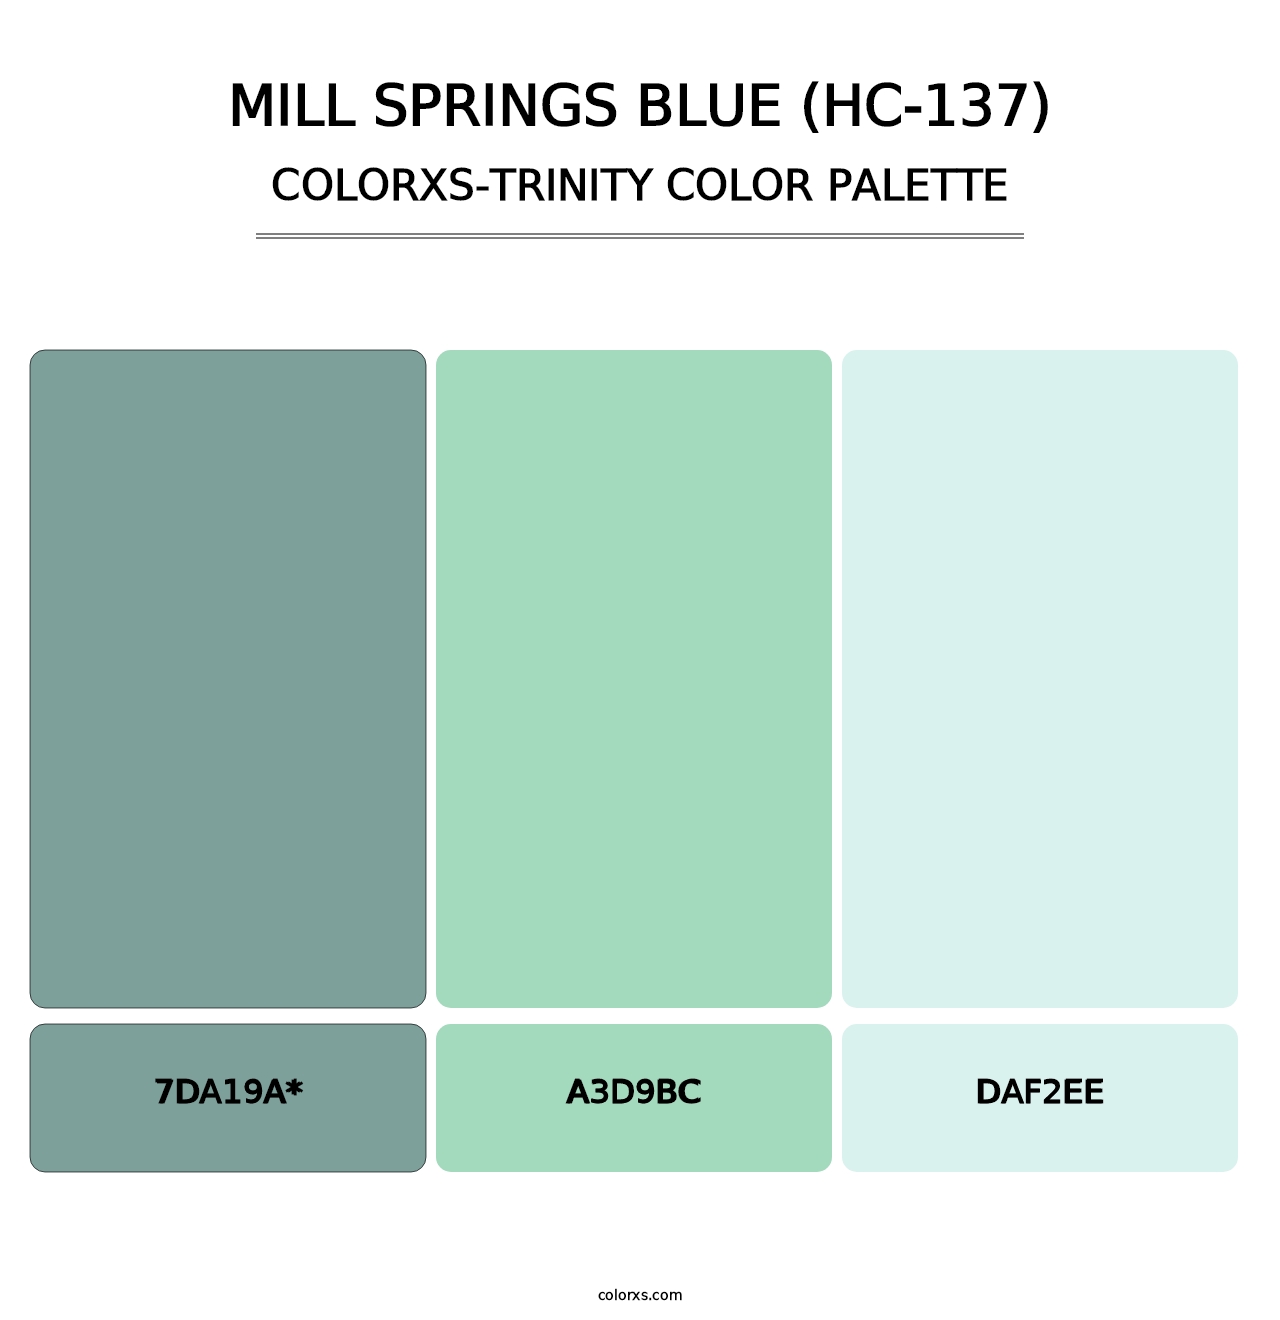 Mill Springs Blue (HC-137) - Colorxs Trinity Palette